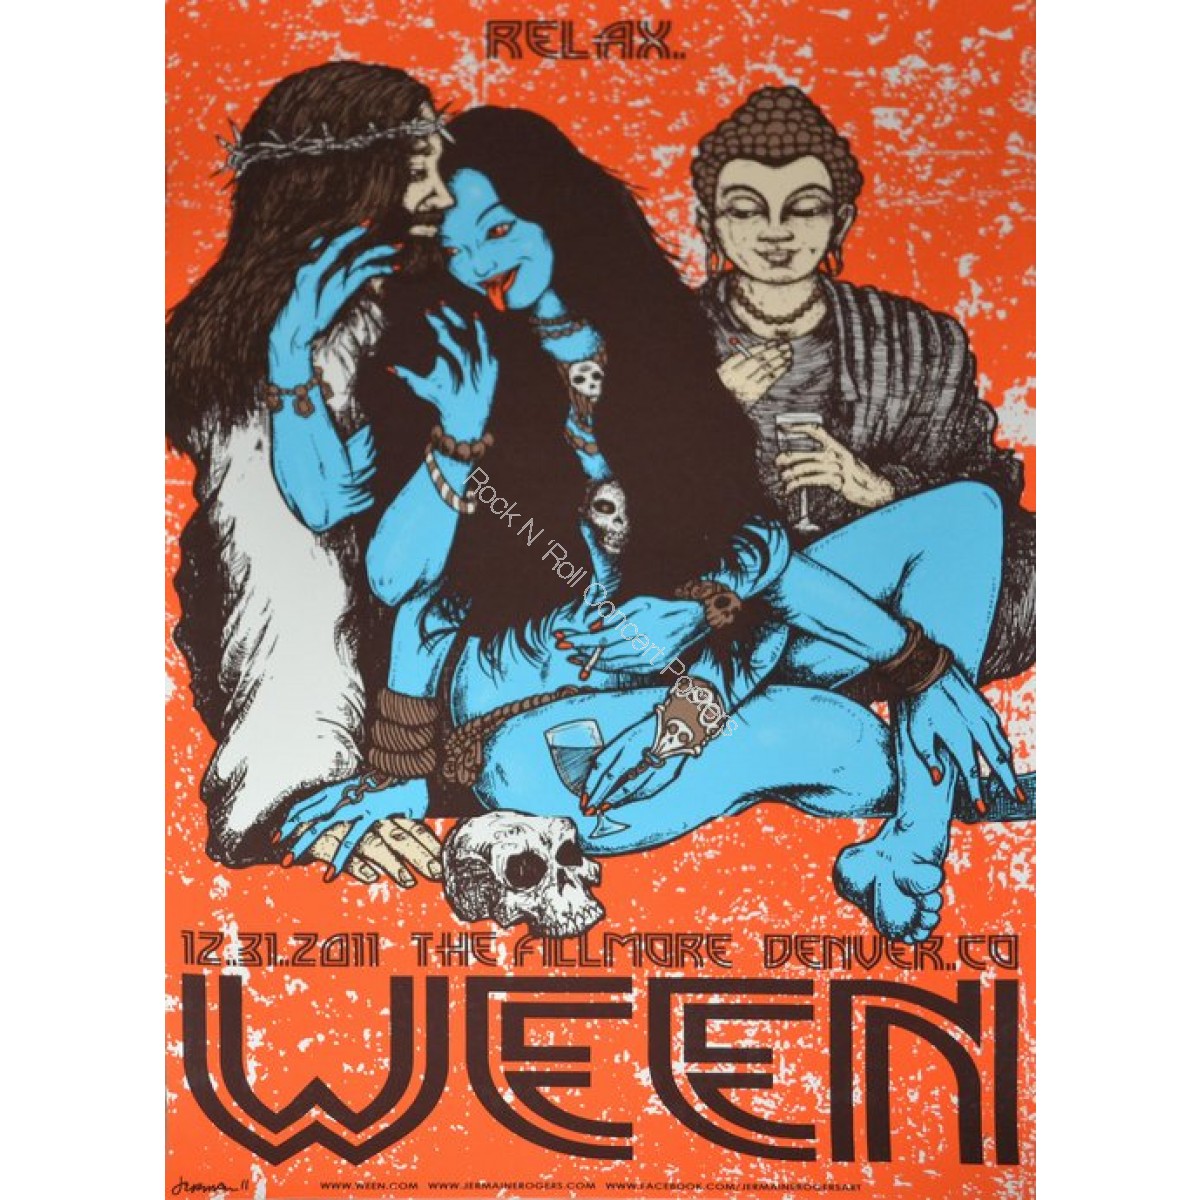 Ween Denver Fillmore 12/31/11 New Years Eve Official Silk Screen Print by Jermaine